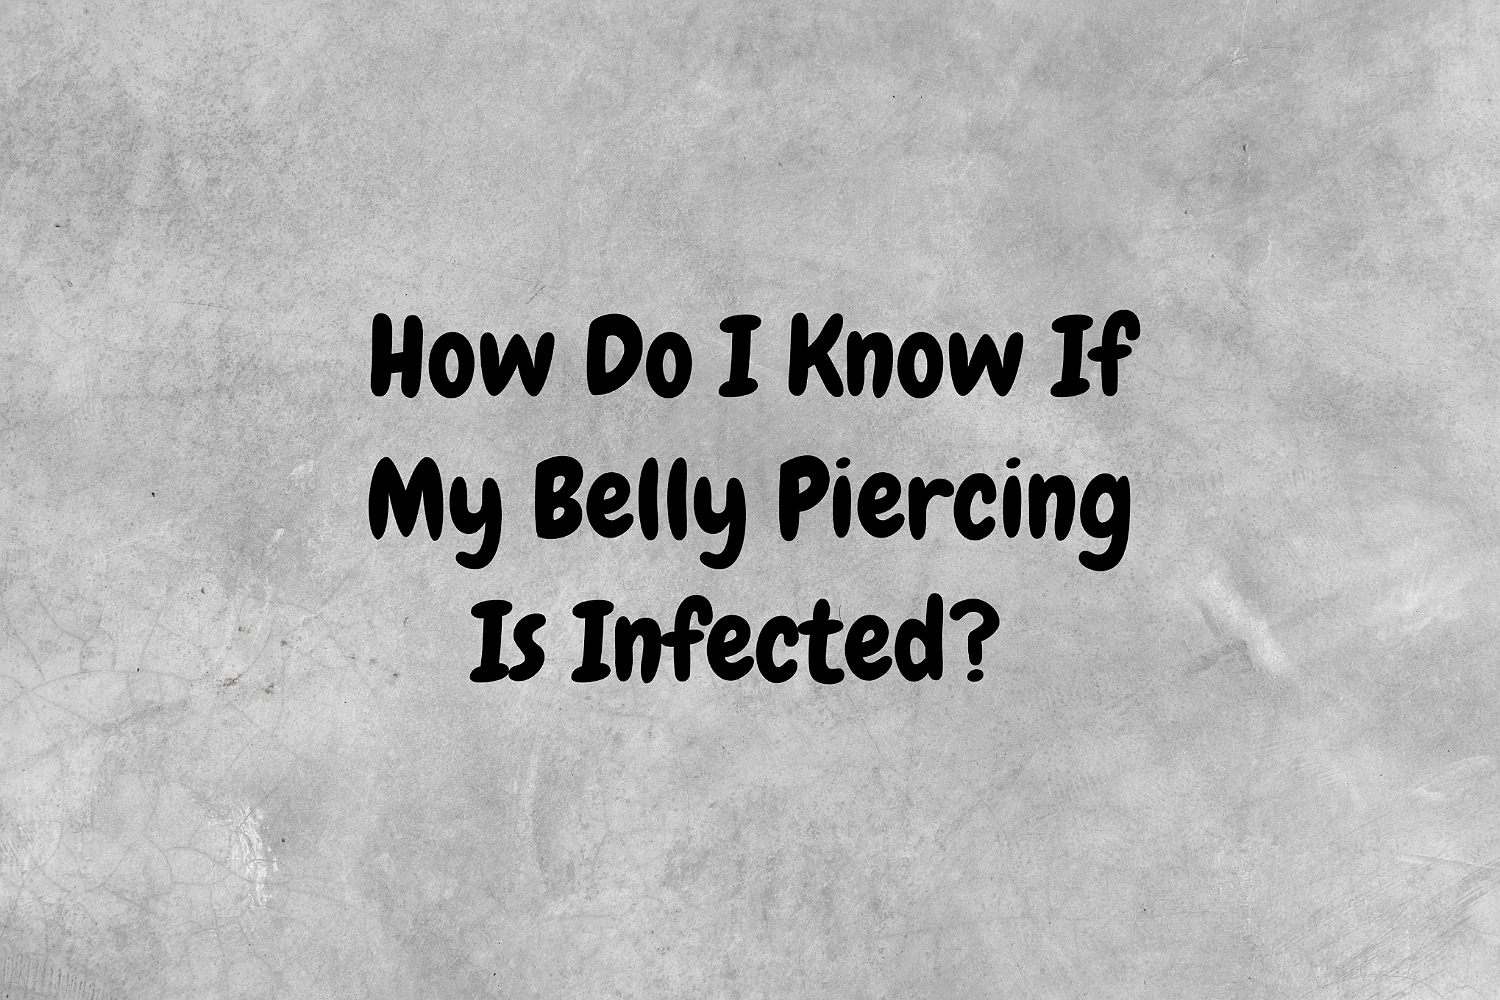 An image with a gray background and black text proposing the question, "How do I know if my belly piercing is infected?".